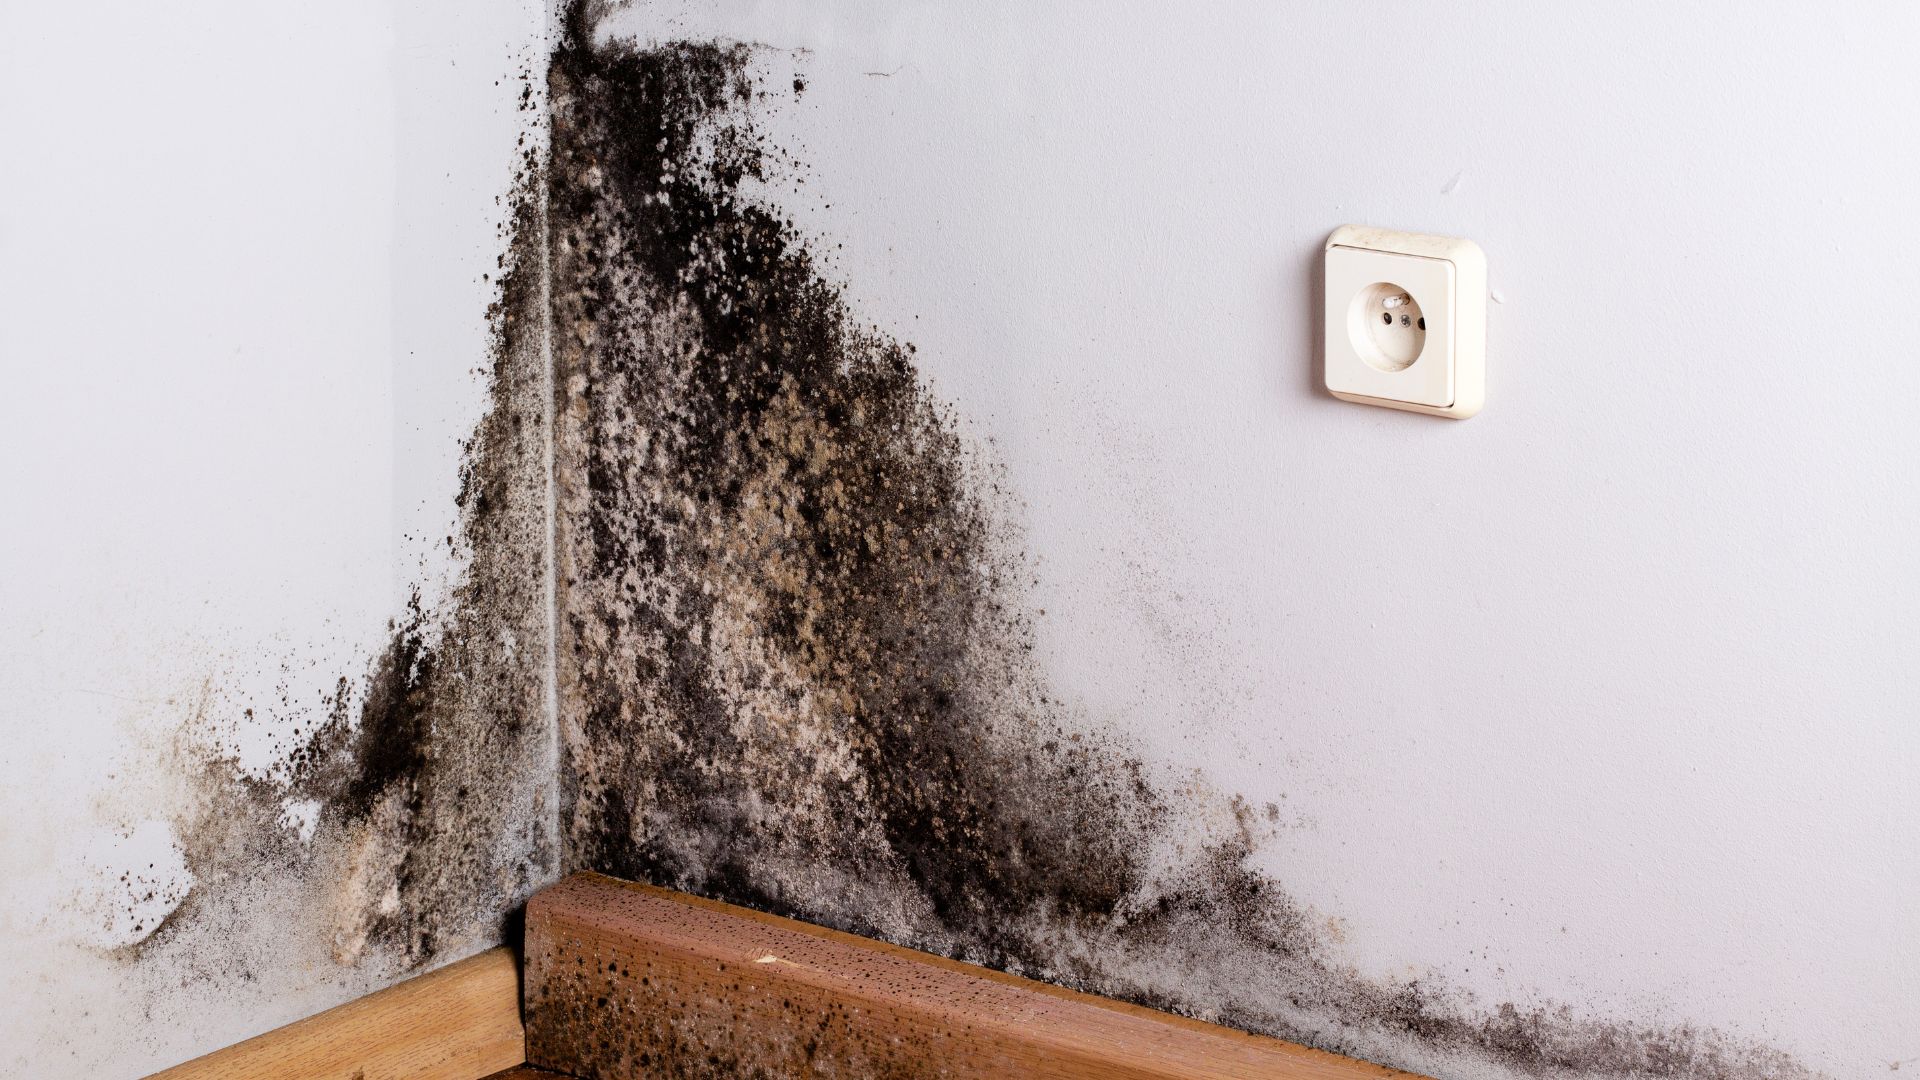 Black Mold: An Introduction To Prevention And Identification